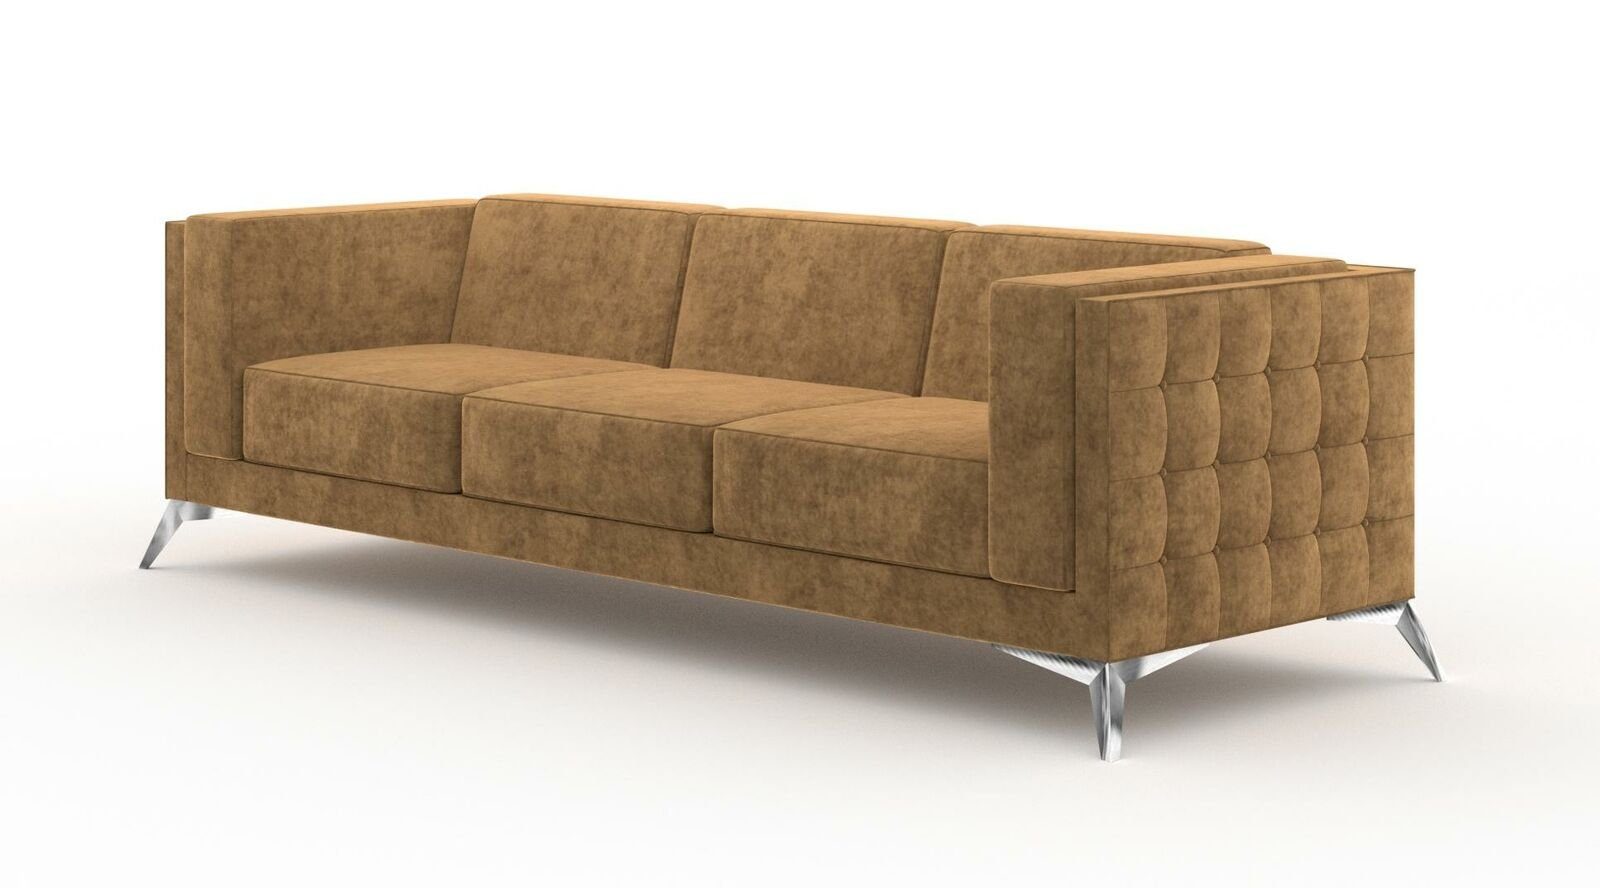 JVmoebel Sofa Couch Polster Sofa Textil Stoff Chesterfield Couchen Dreisitzer, Made in Europe